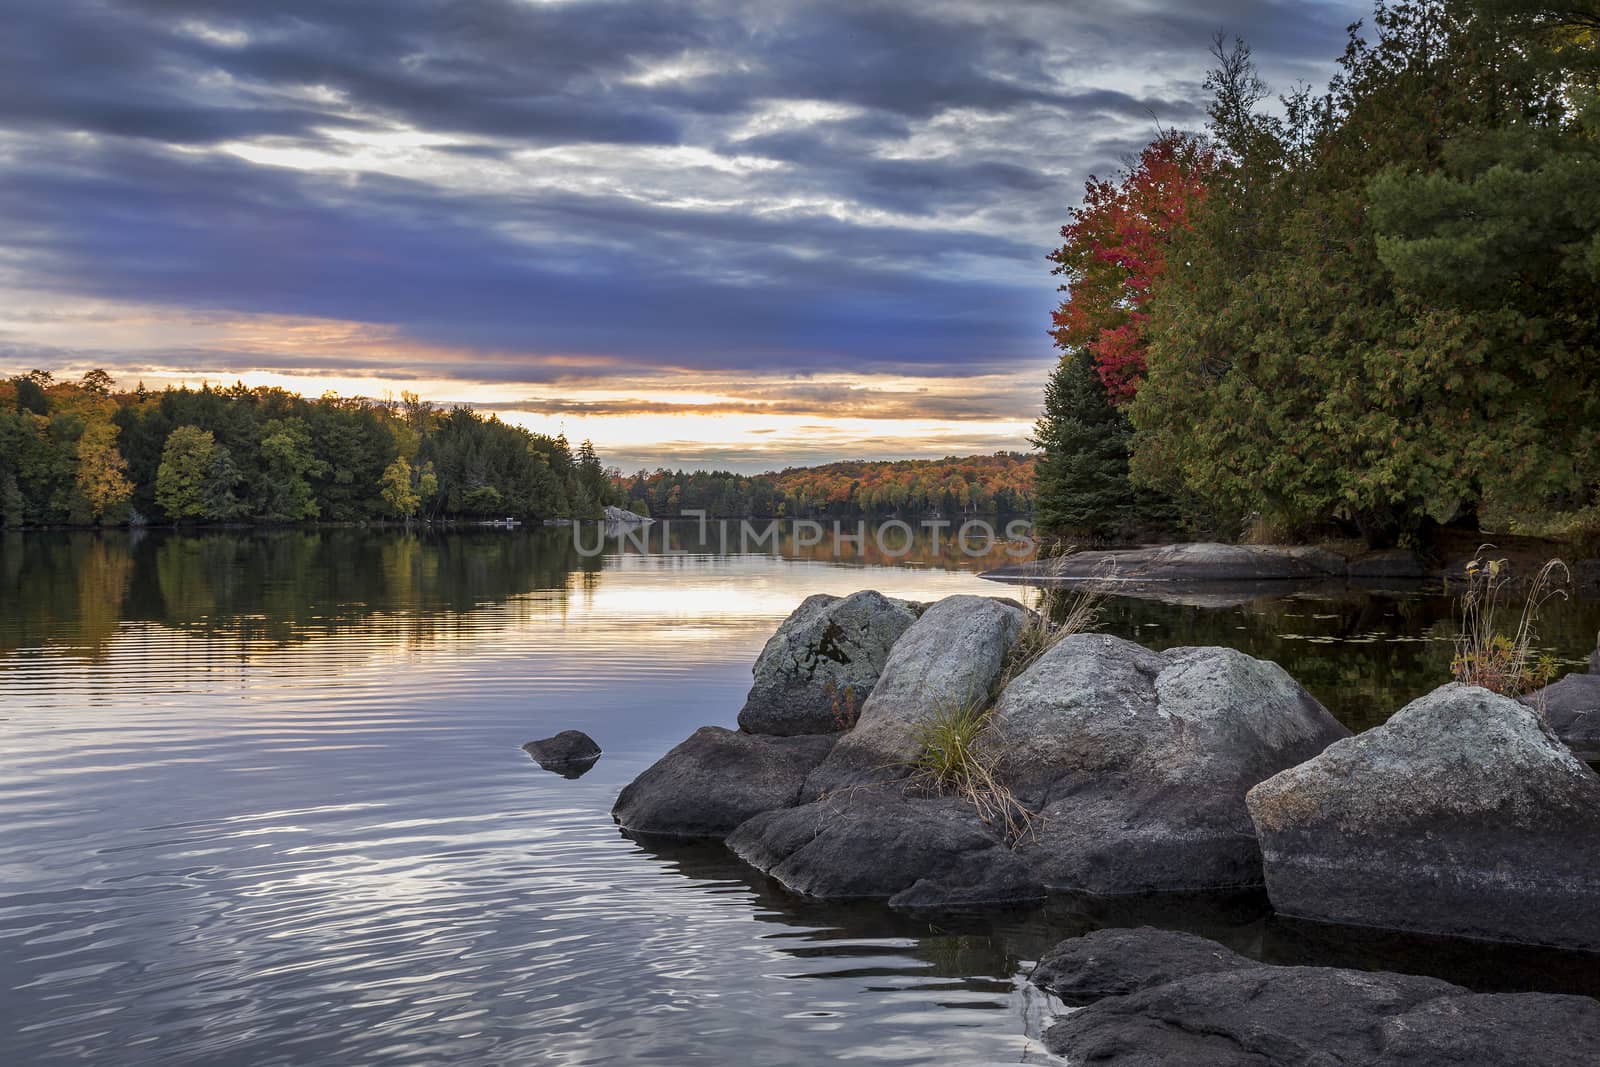 Shoreline of an Autumn Lake at Sunset - Ontario, Canada by gonepaddling